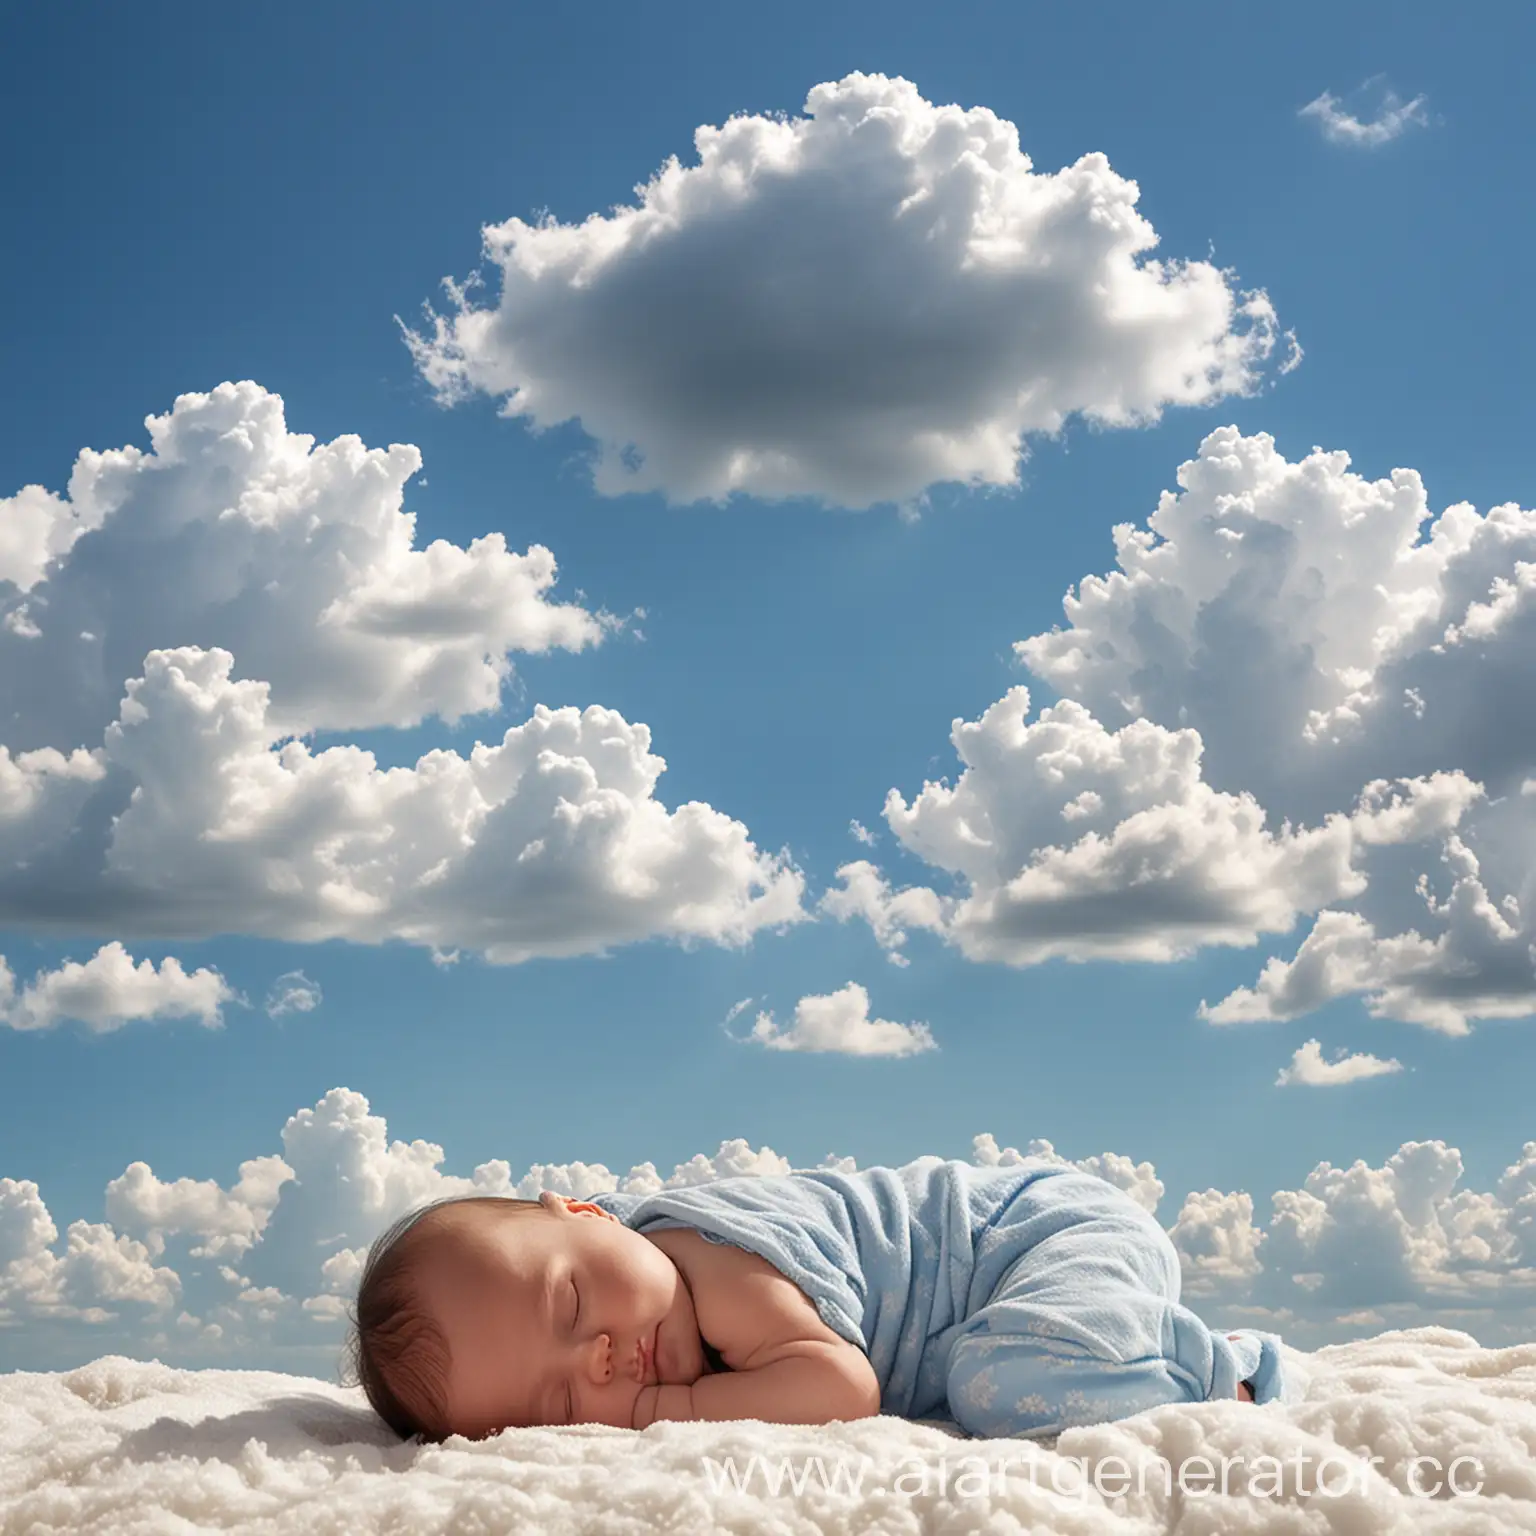 Tranquil-Baby-Sleeping-Under-Blue-Sky-with-Clouds